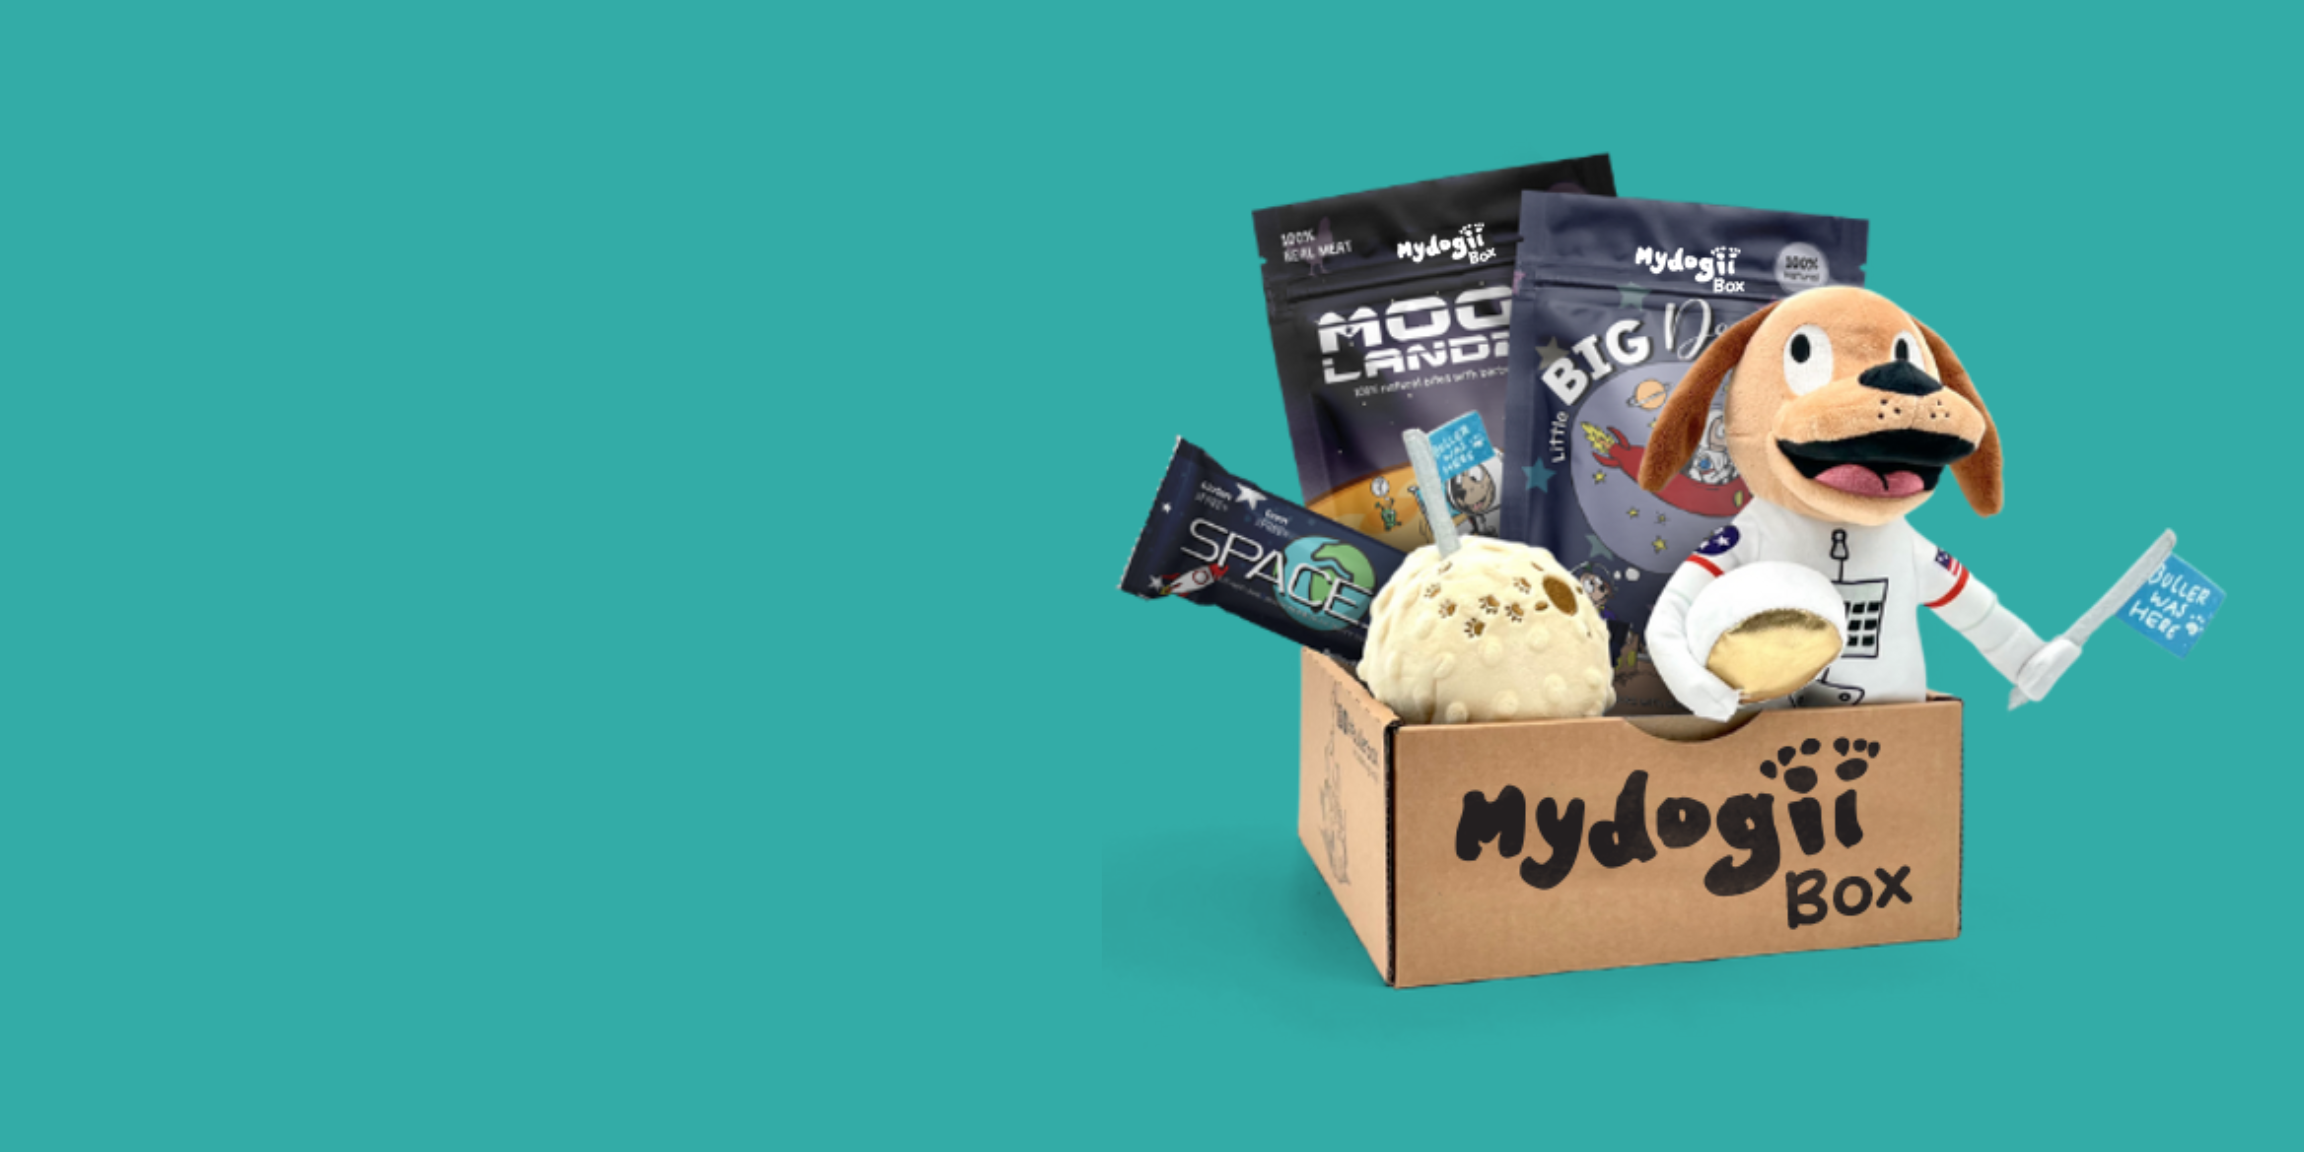 Get MydogiiBox Subscription - new surprises every month